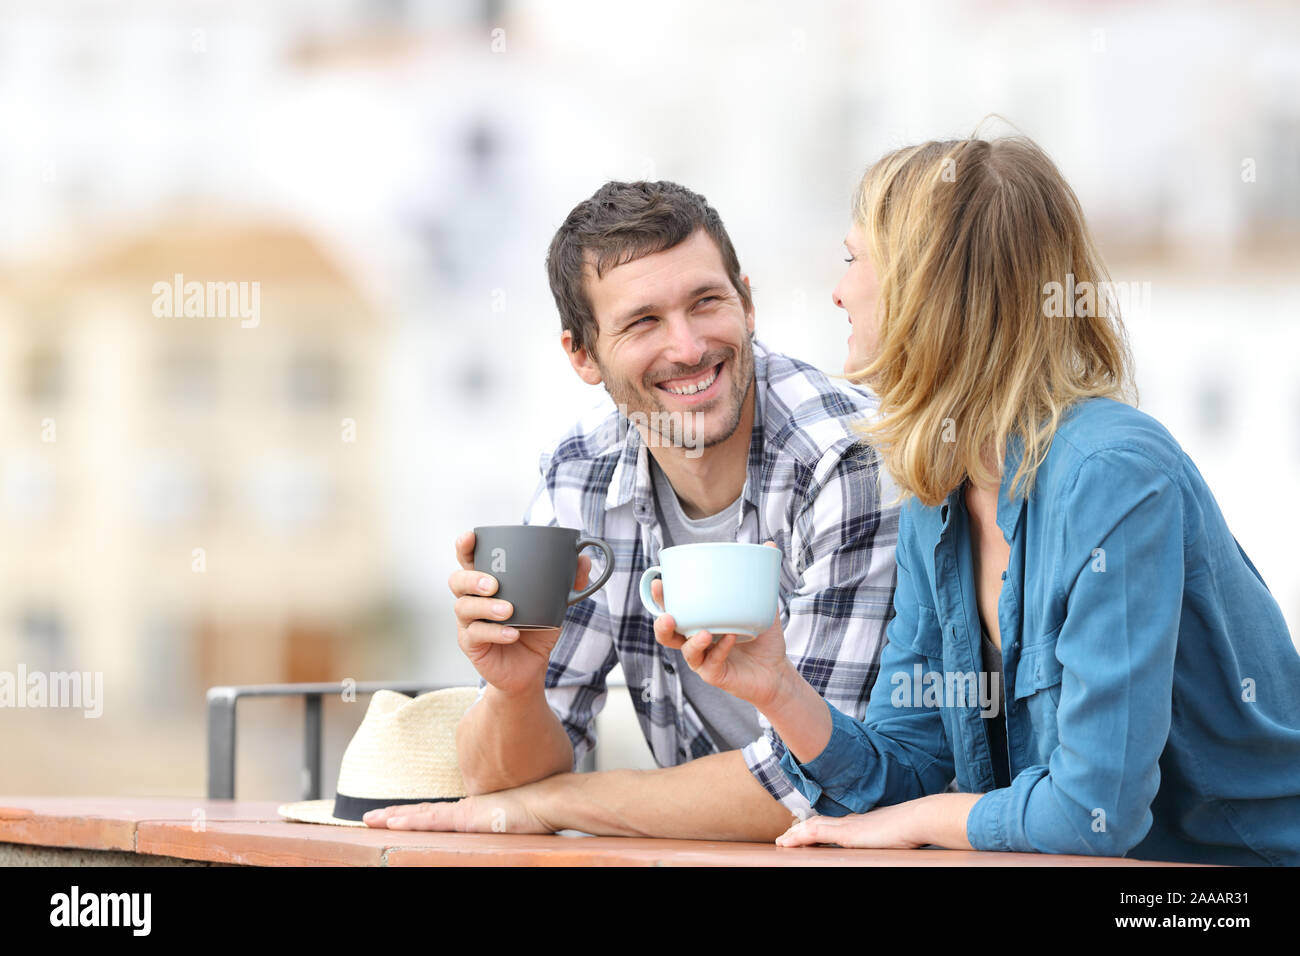 Happy couple talking holding coffee mugs standing in a balcony outdoors in a rural town Stock Photo